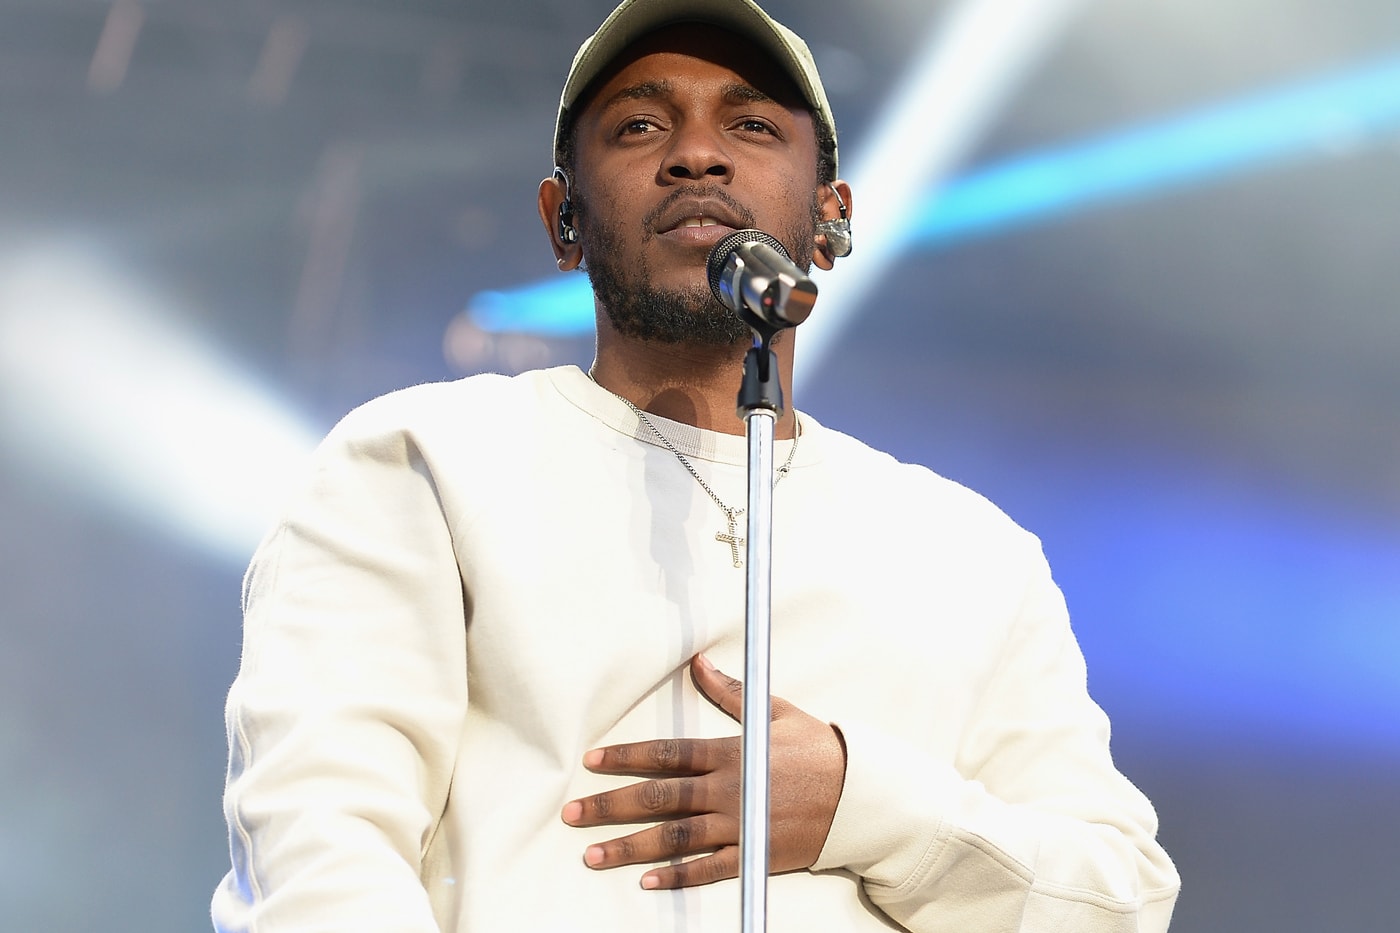 Watch Kendrick Lamar Freestyle Over Kanye West's "So Appalled"